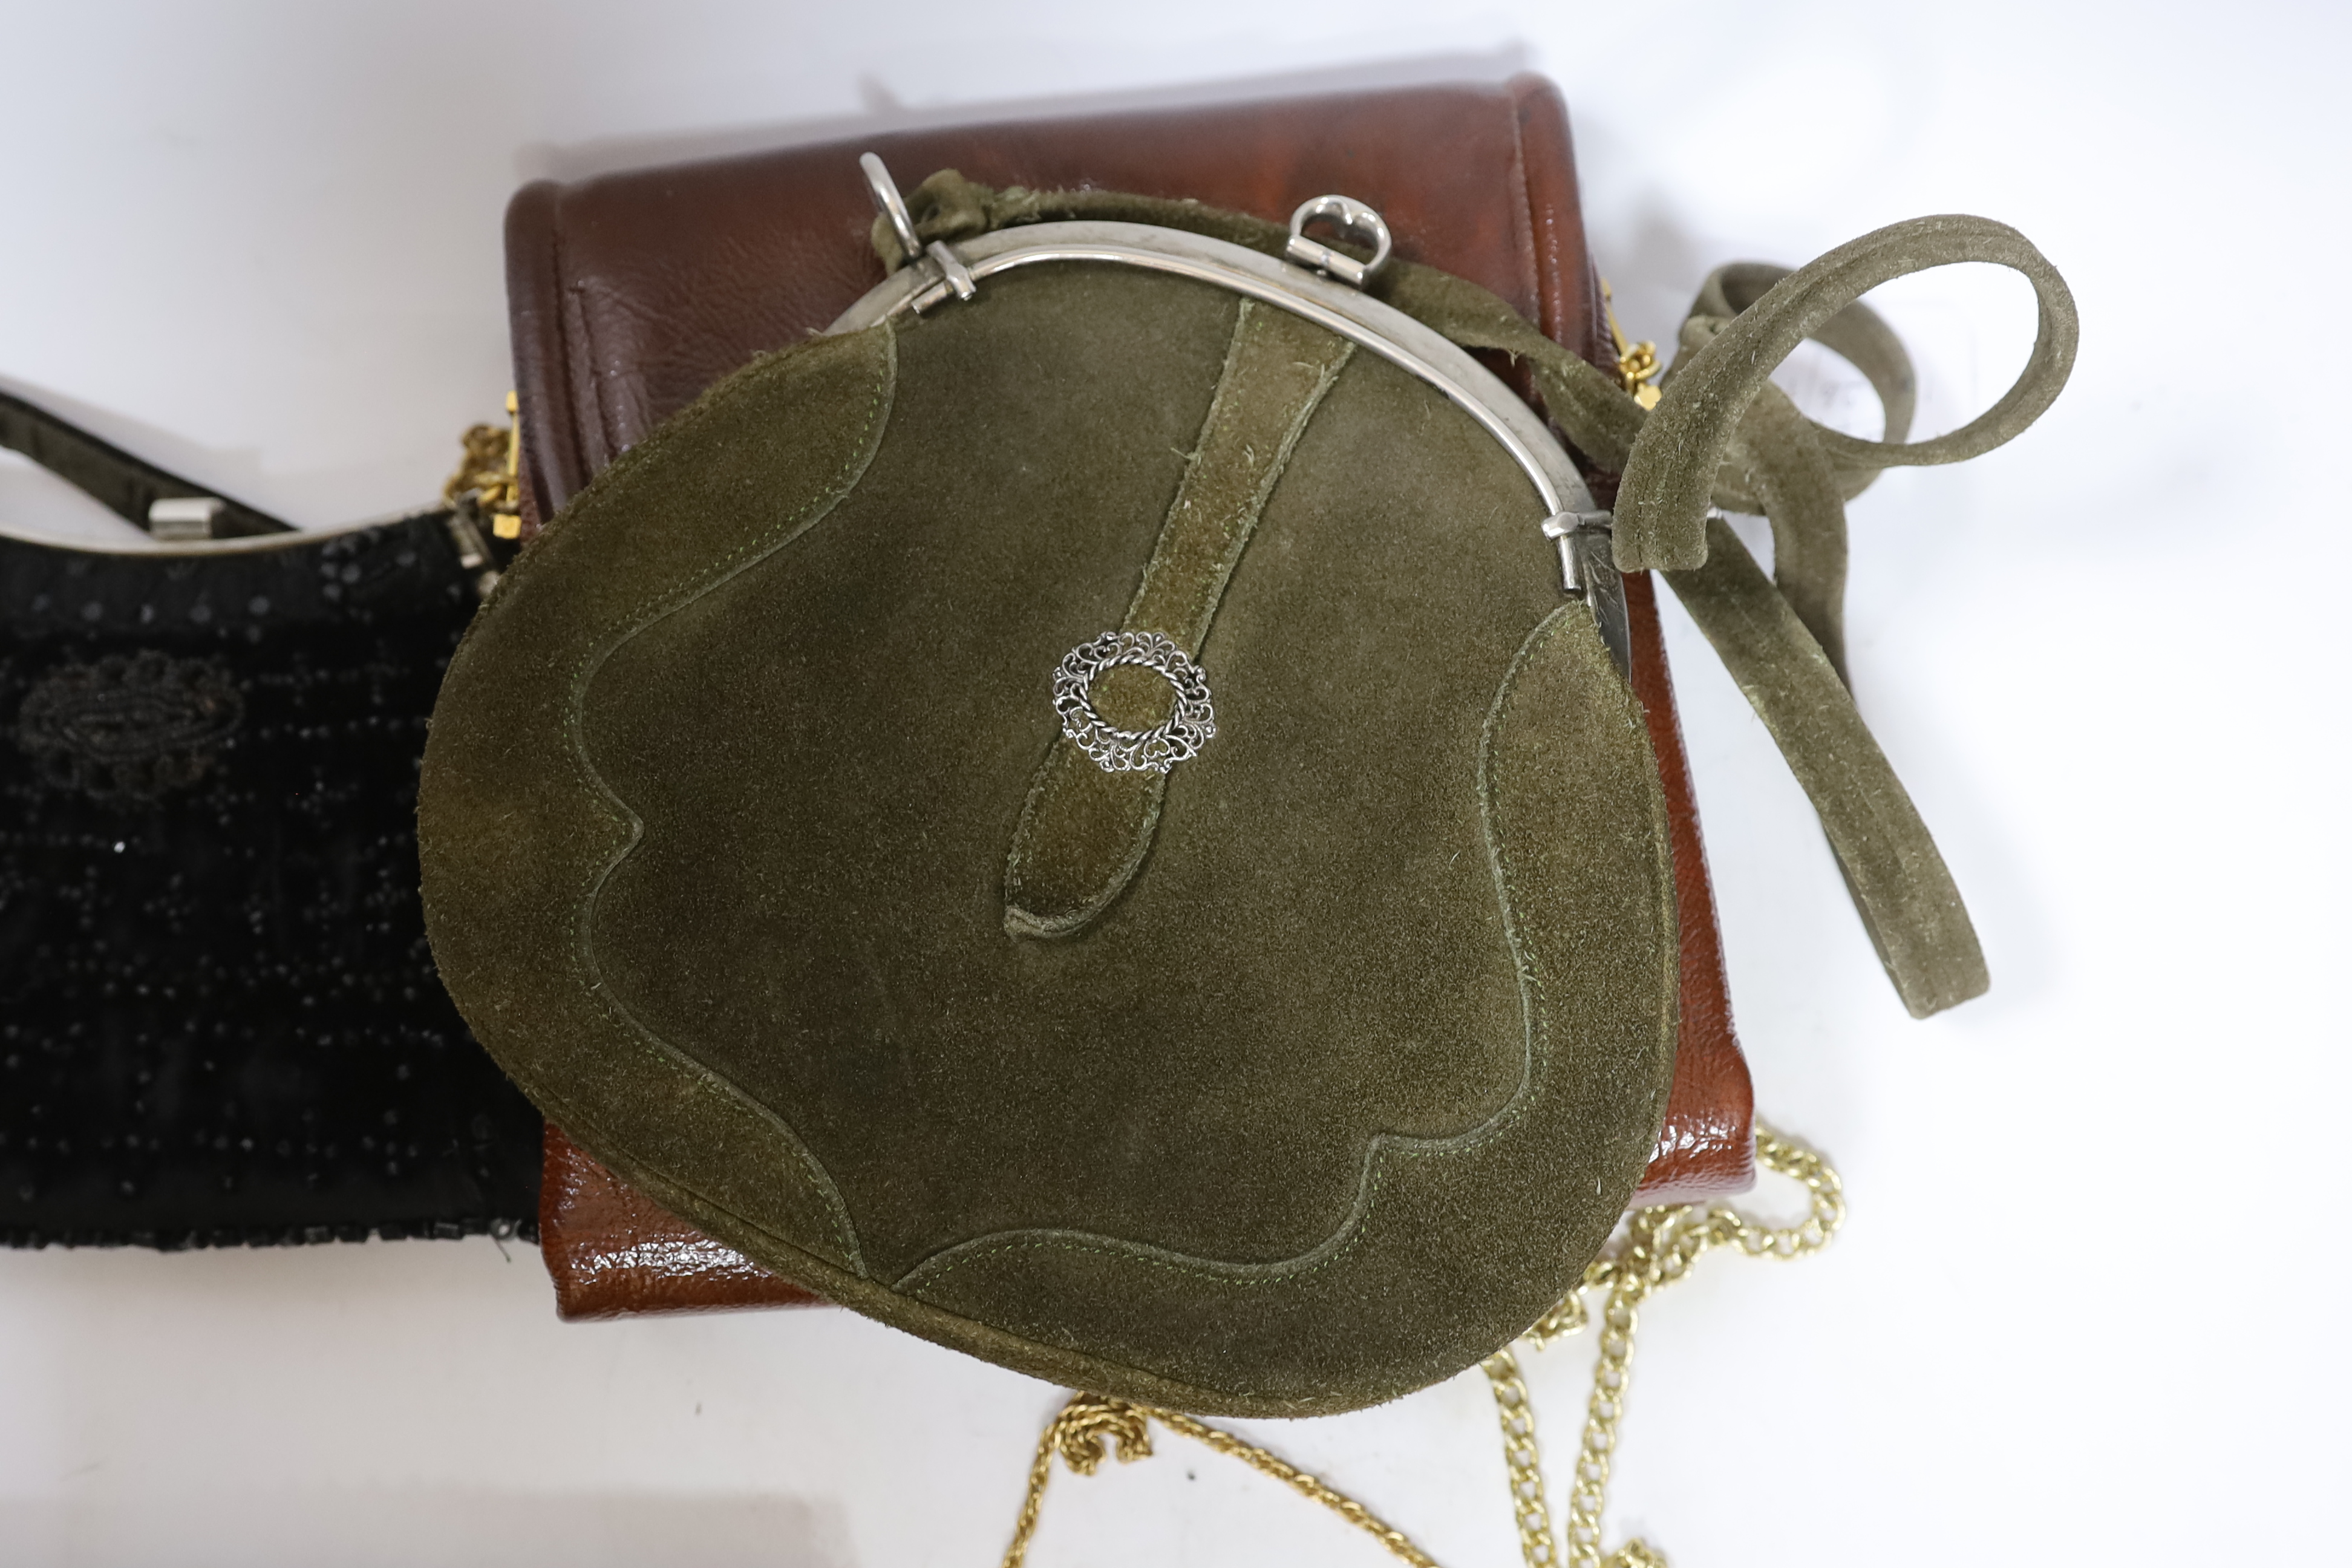 A Tseklenis ladies handbag, a green suede bag, five various evening bags and two purses